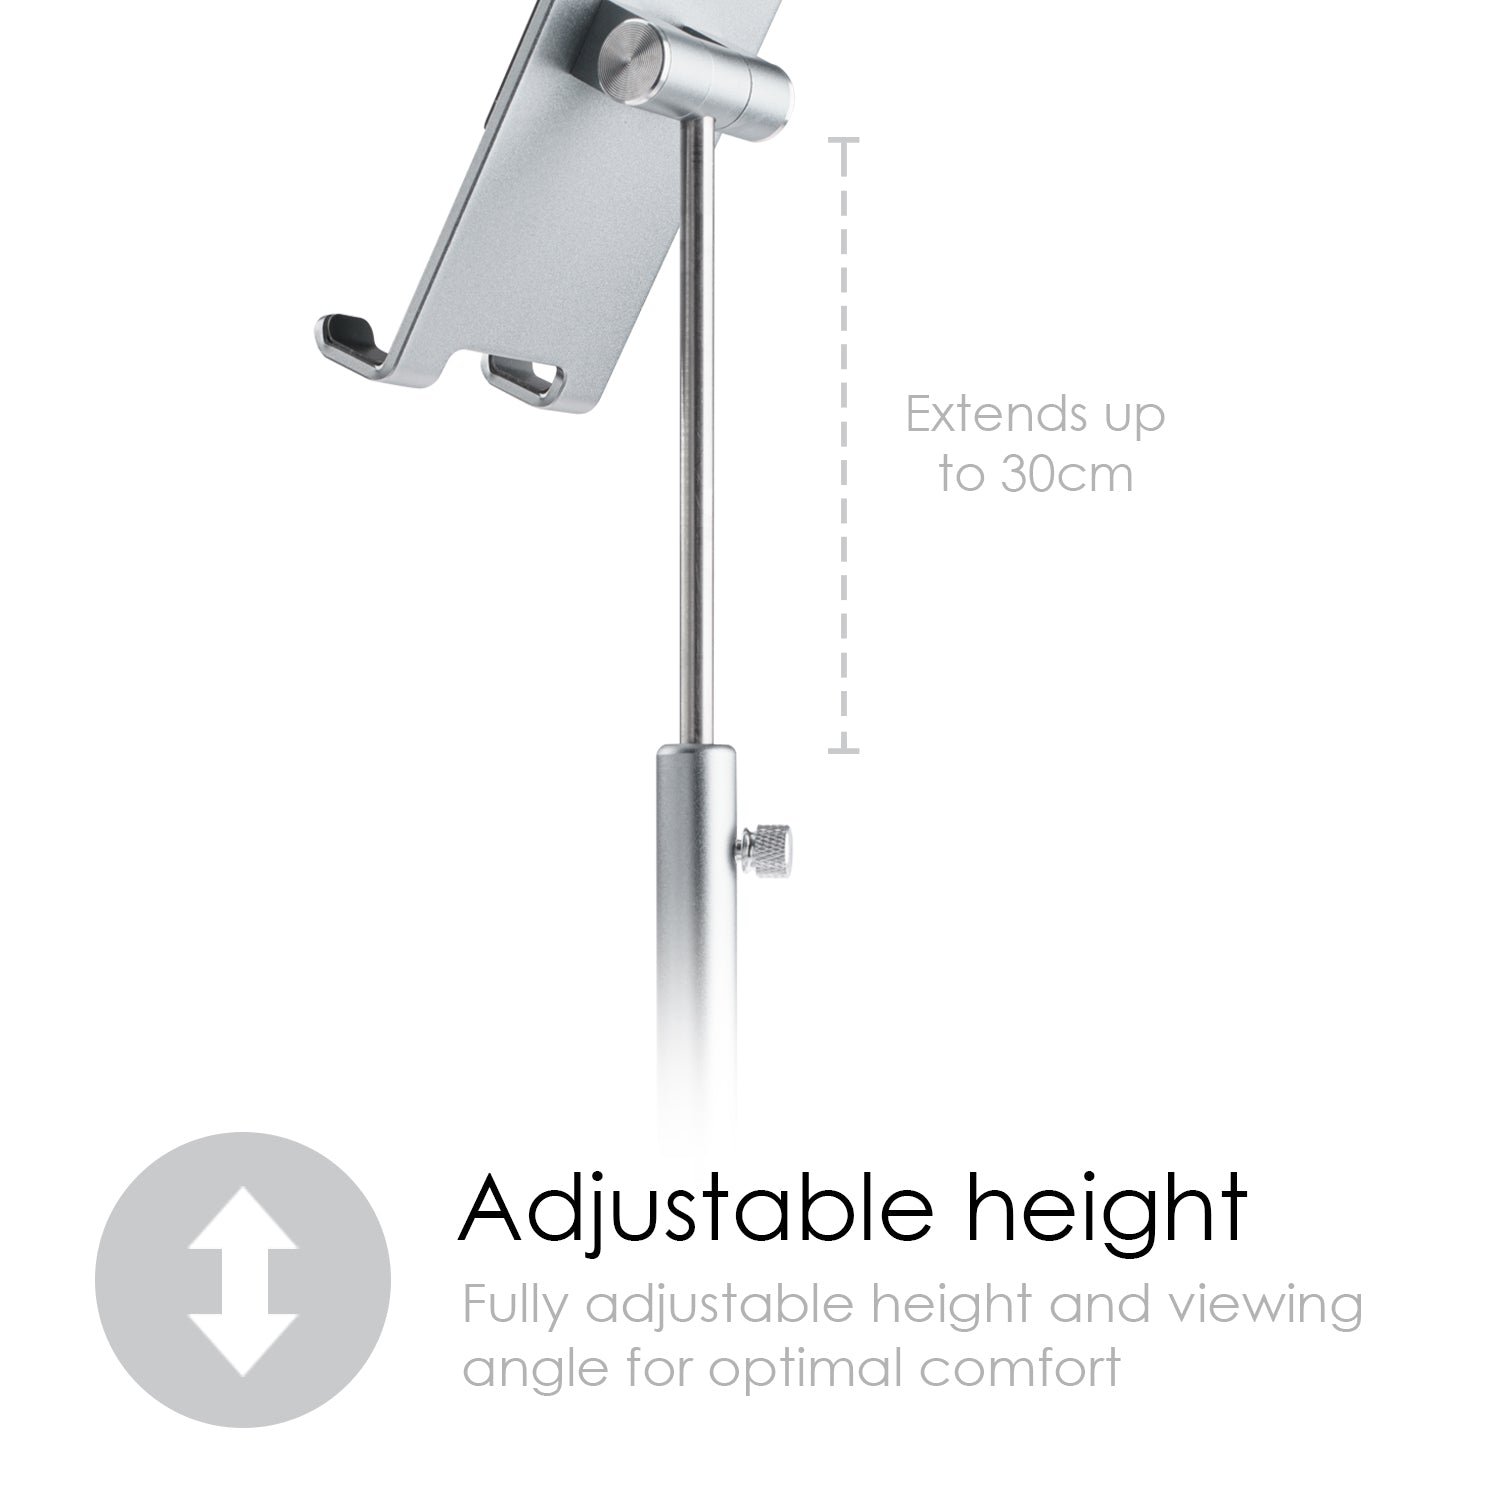 Image shows the adjustable height  of an aluminium metal smartphone and tablet desk stand . Text reads "extends up to 30cm"  and "Adjustable height - fully adjustable height and viewing angle for optimal comfort. "